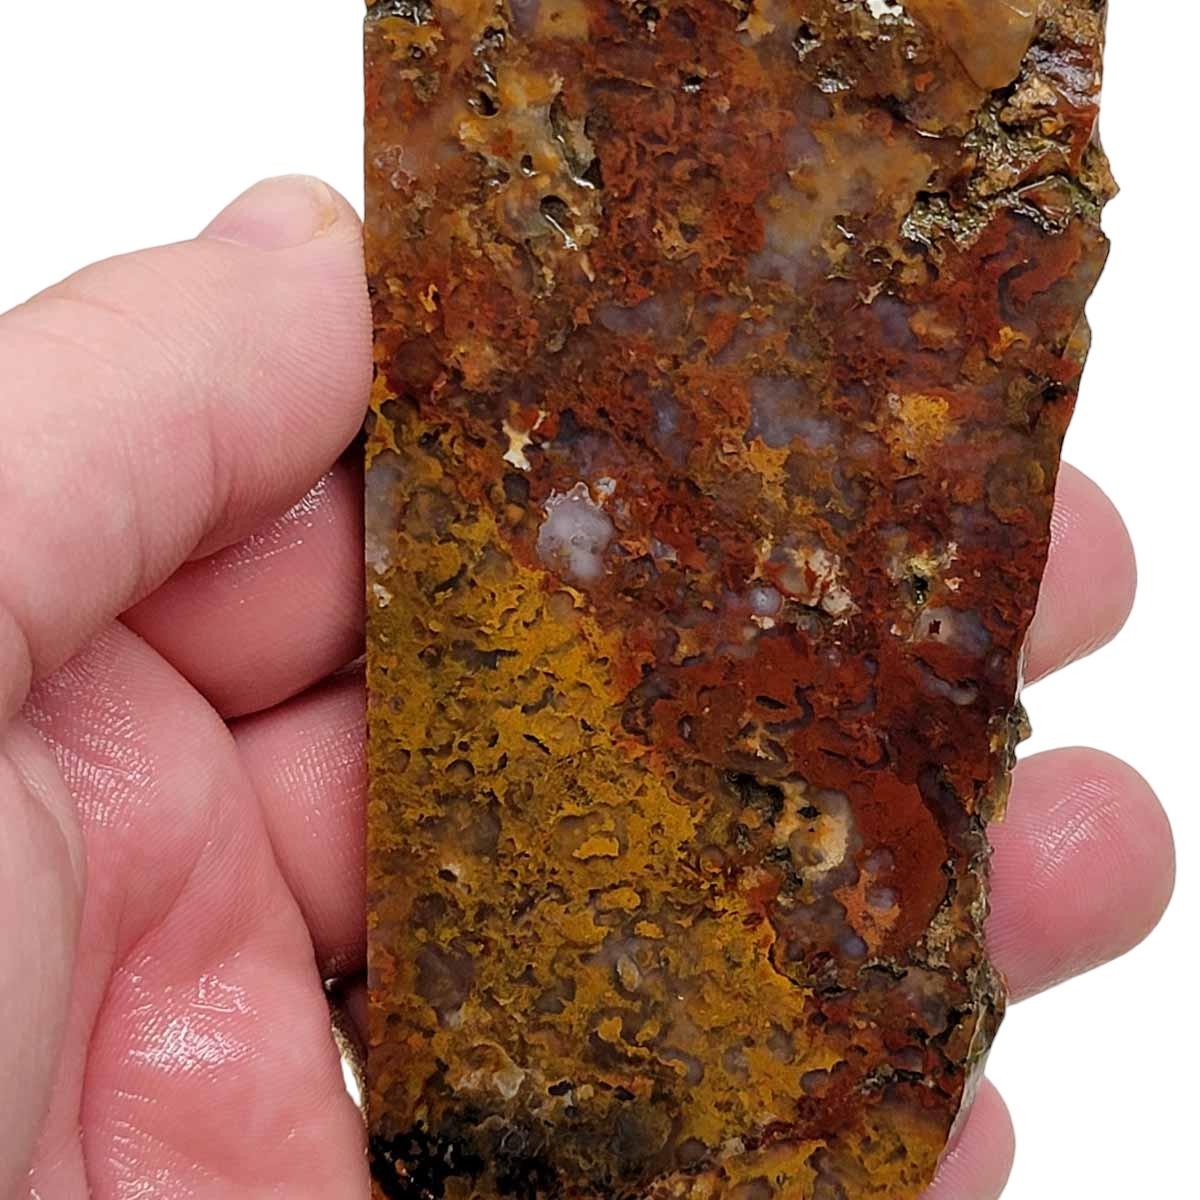 Powell Butte Plume Agate Slab! Lapidary Stone Slab! - Lapidary Central